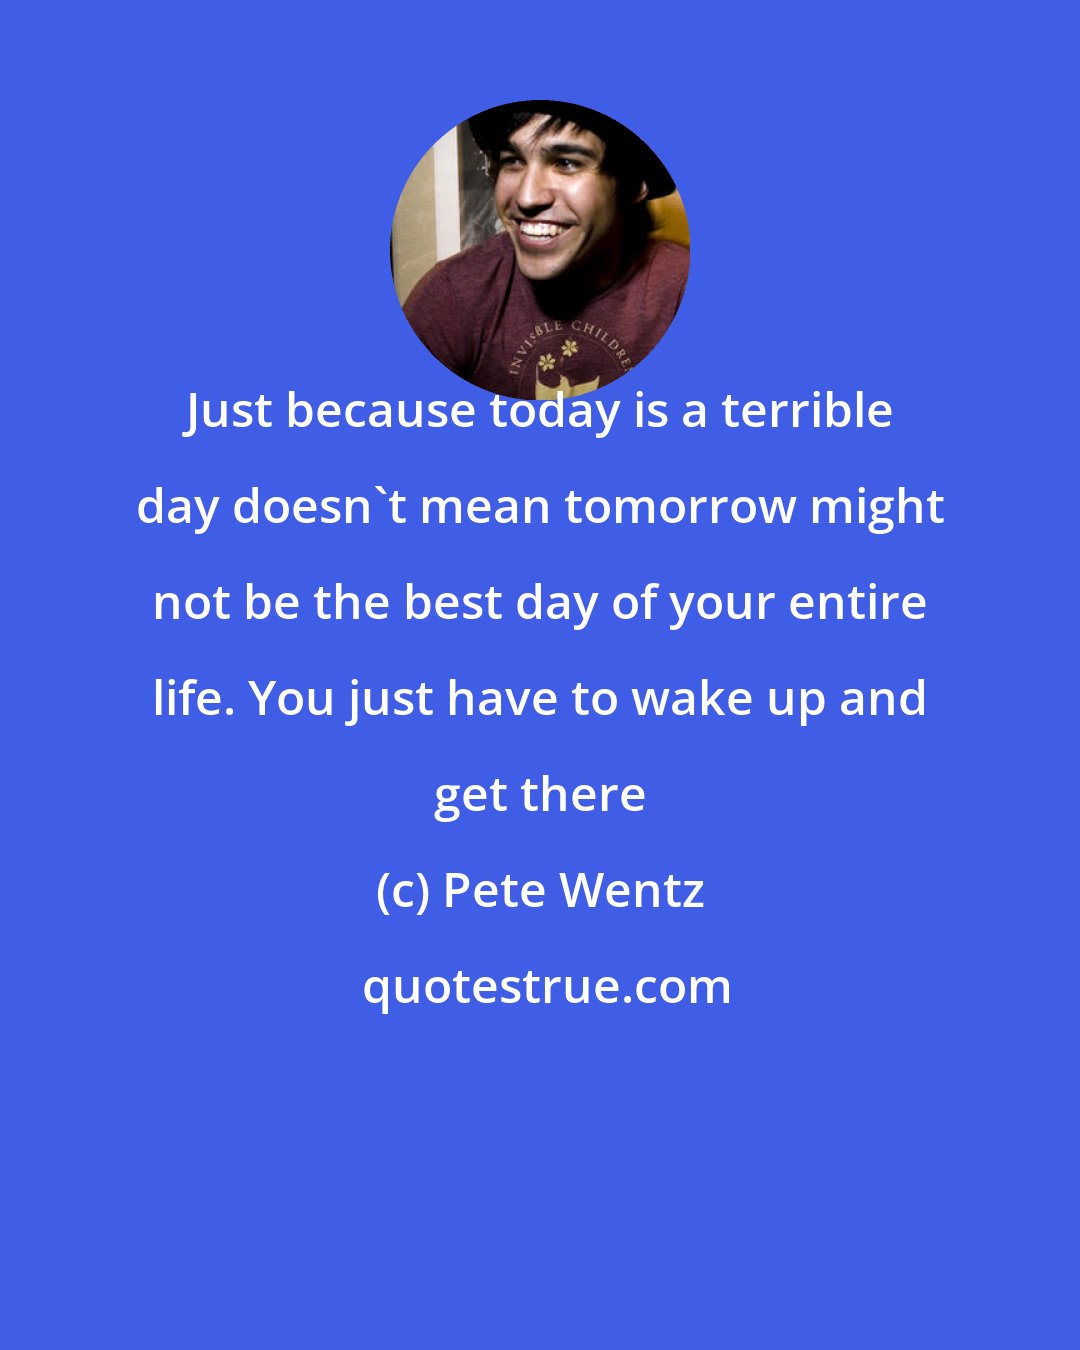 Pete Wentz: Just because today is a terrible day doesn't mean tomorrow might not be the best day of your entire life. You just have to wake up and get there